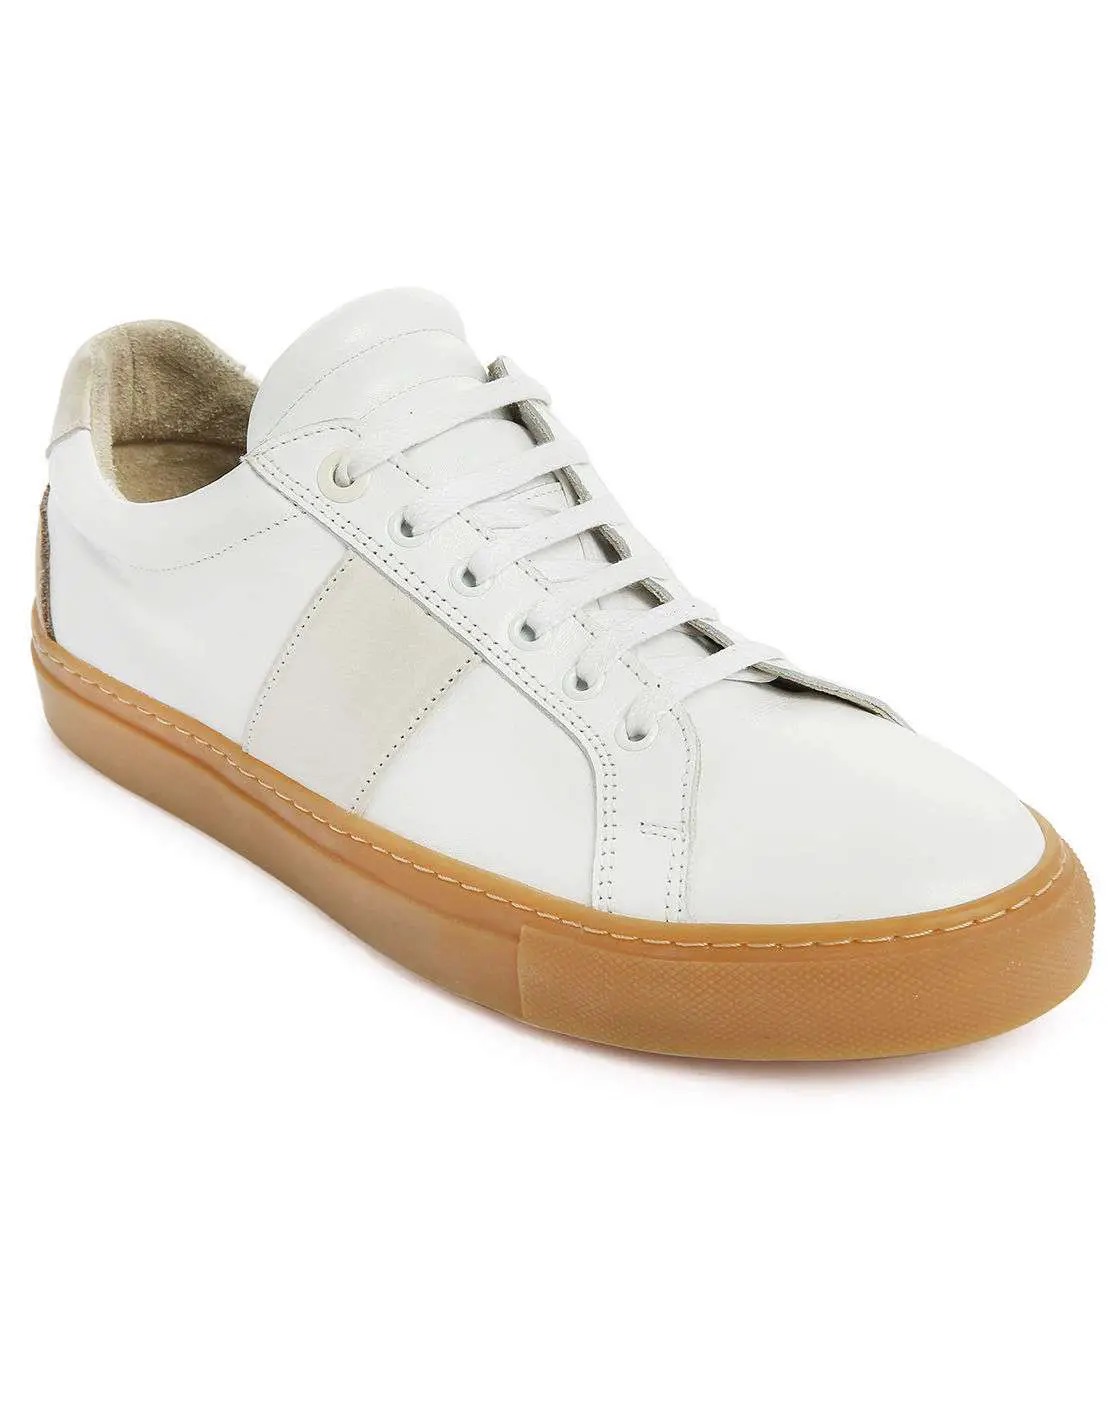 National standard Edition 4 White Leather Gum Sole Sneakers in White ...